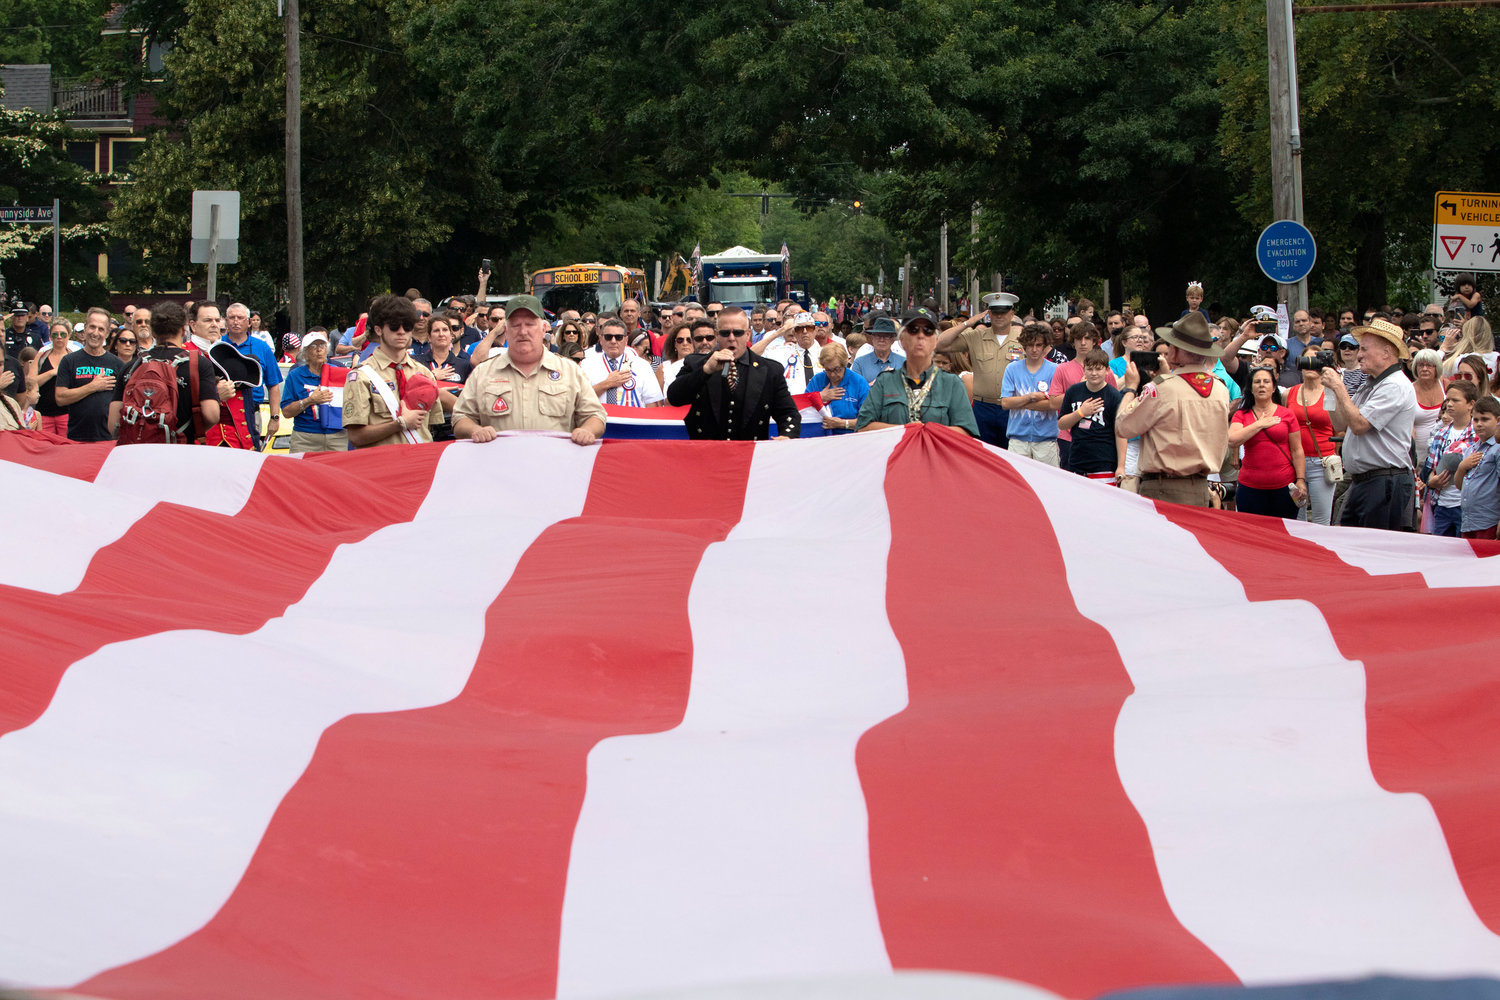 The Singing Trooper, Daniel Clark, leads the crowd in the National Anthem at the opening ceremony for the 2021 Bristol Fourth of July Parade, just before the procession stepped off from the intersection of Hope and Chestnut streets. The enormous flag was carried down the two-and-a-half-mile route by Scout troops.